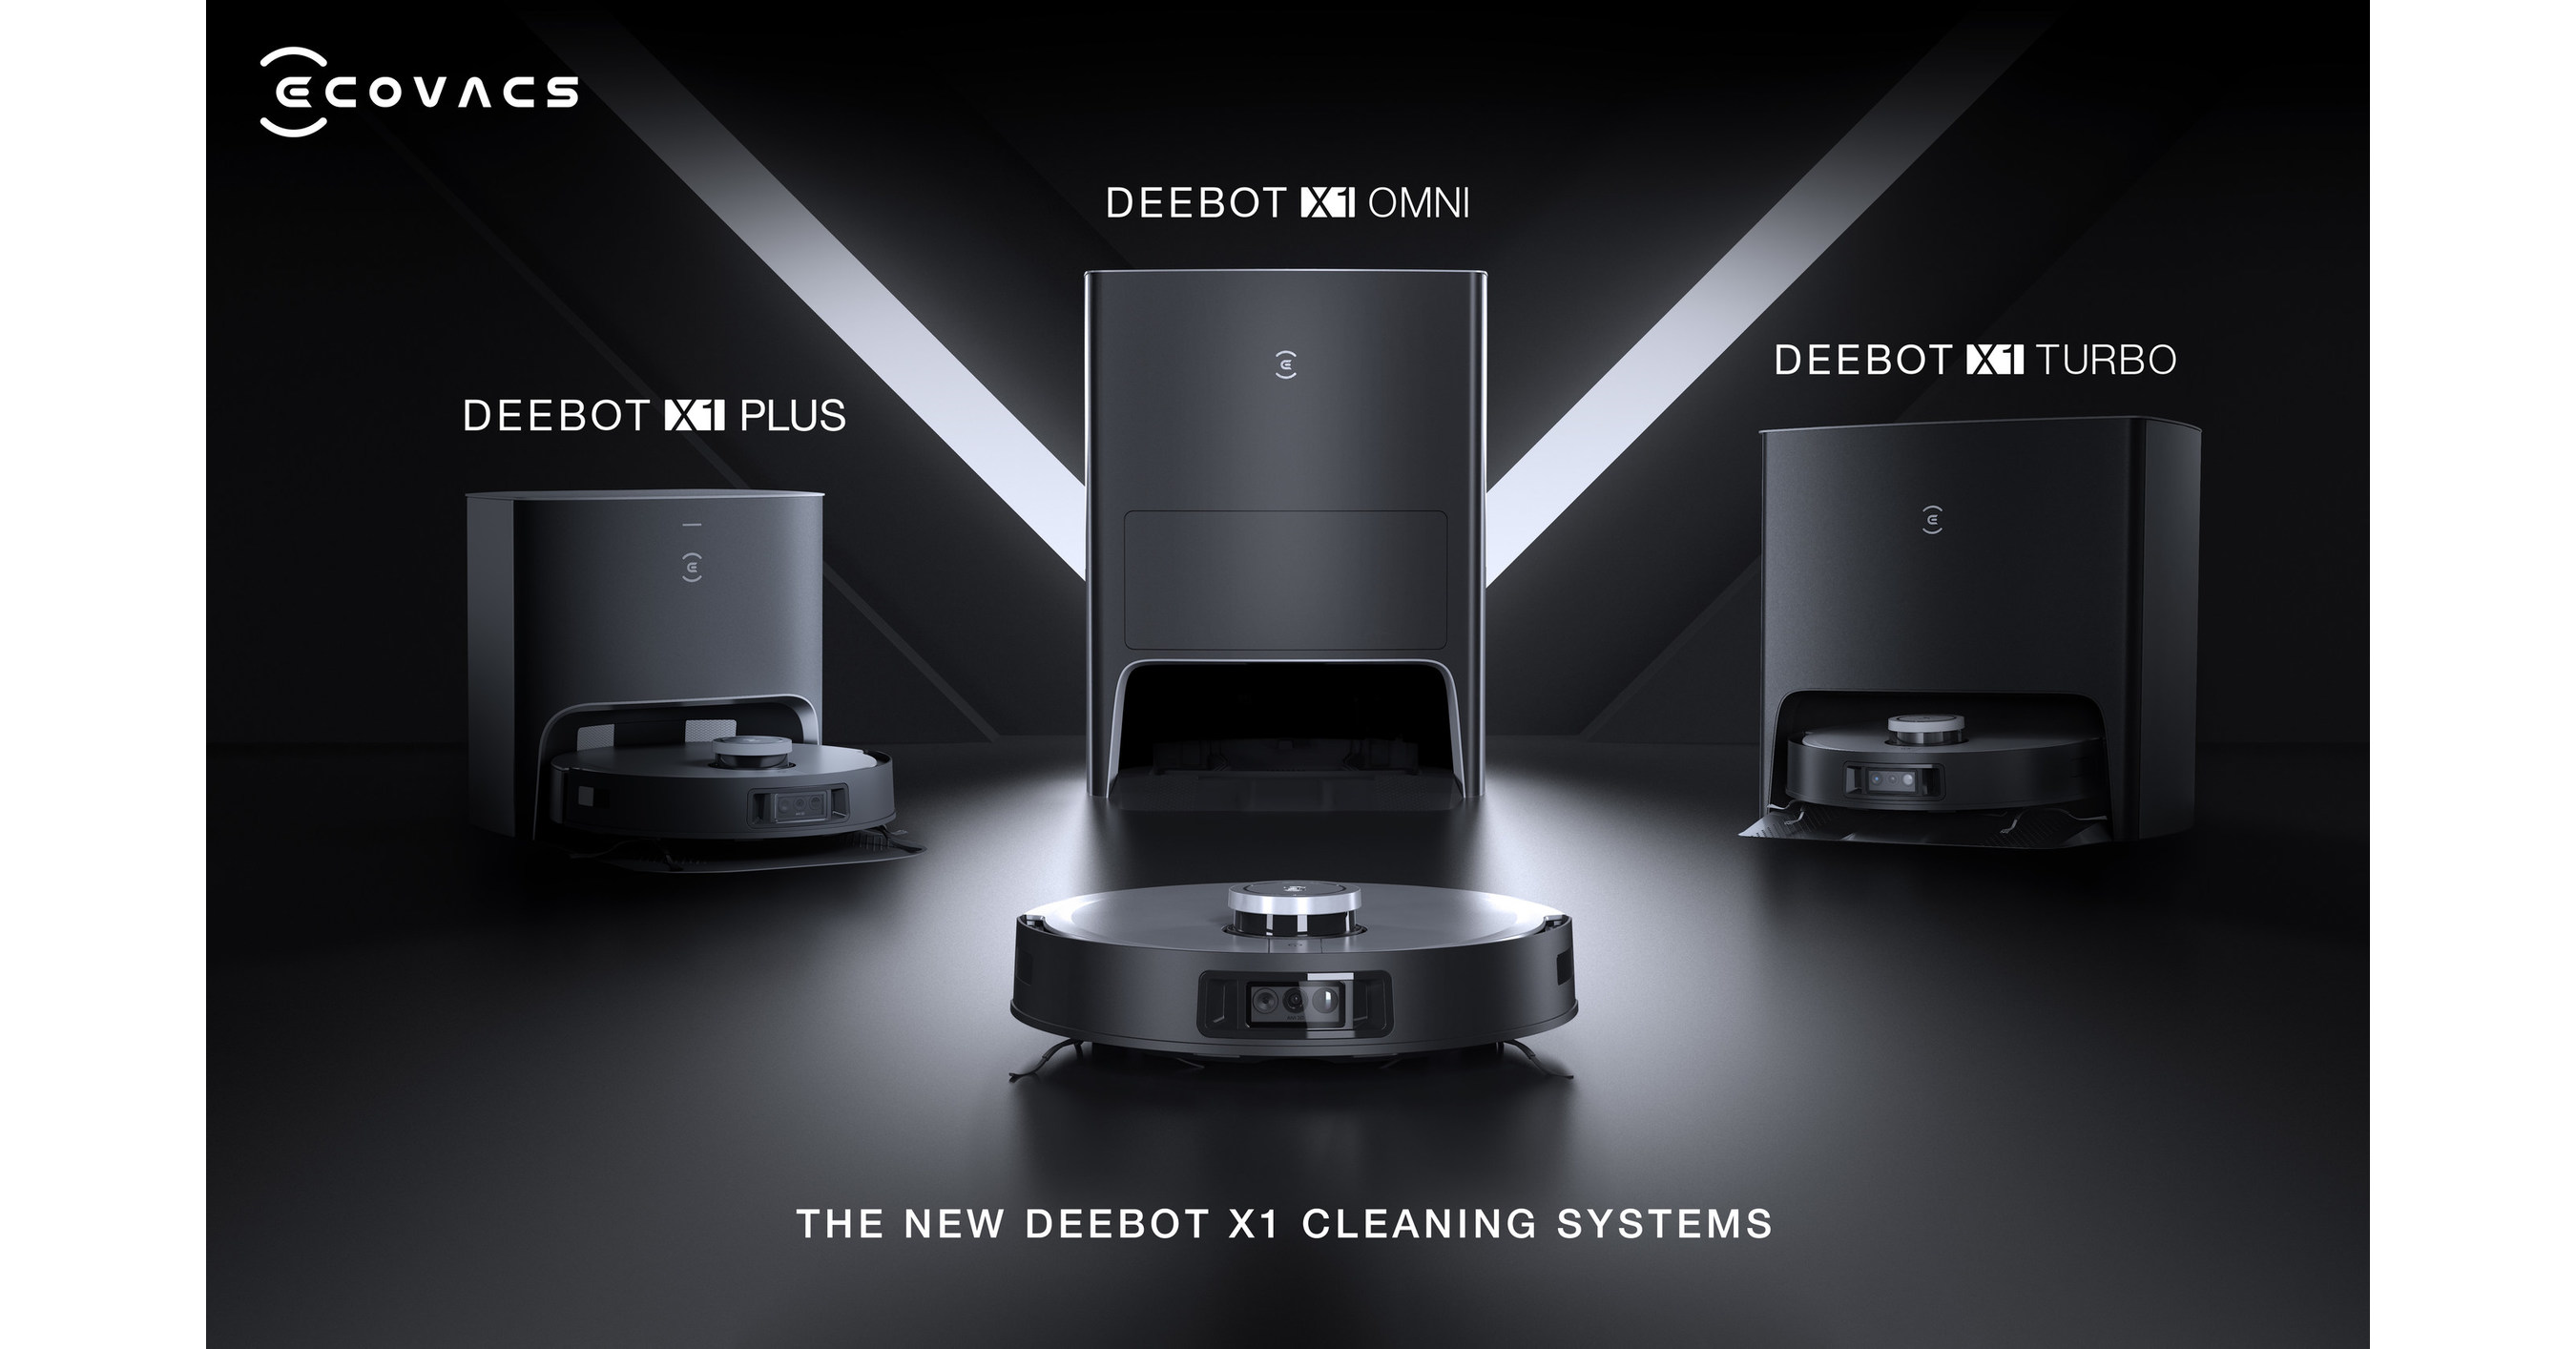 Ecovacs launches its new Deebot X2 Omni robot vacuum and mop today